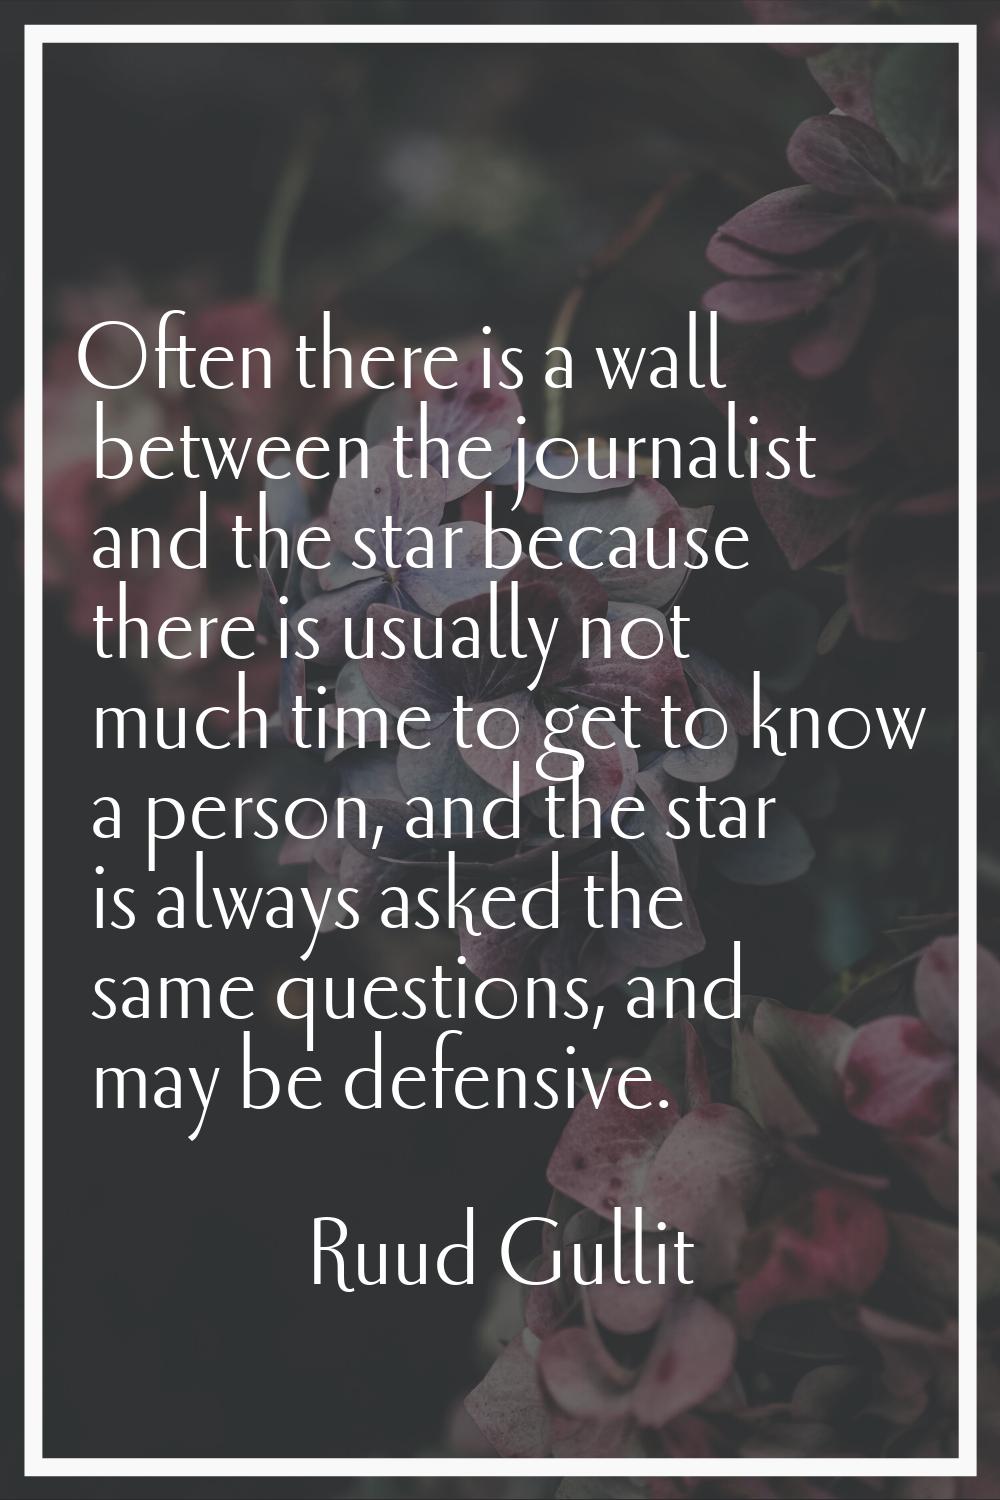 Often there is a wall between the journalist and the star because there is usually not much time to